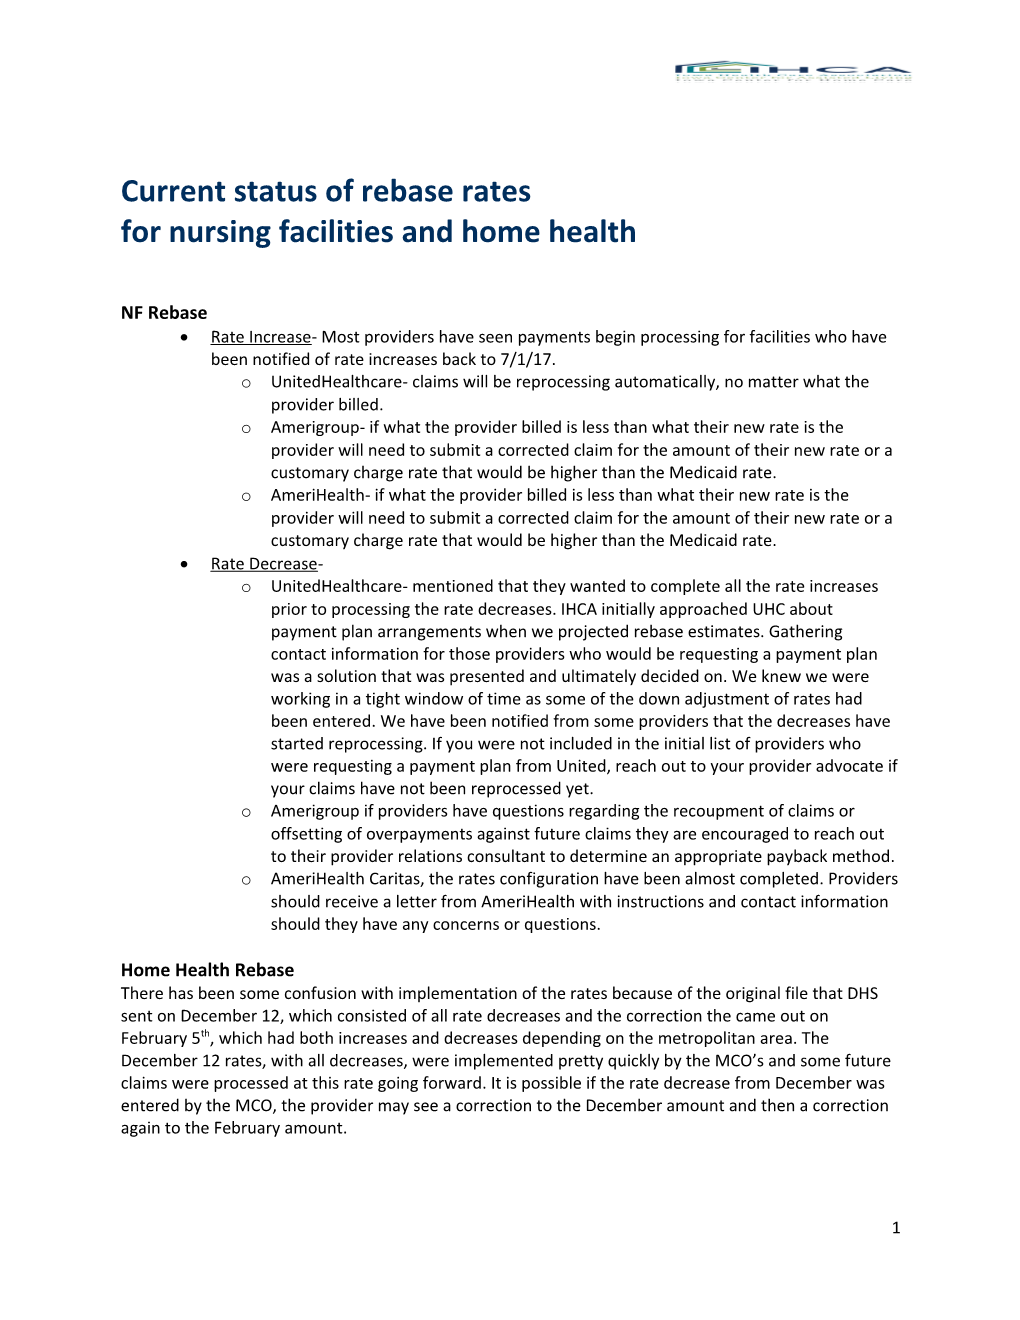 Current Status of Rebase Rates for Nursing Facilities and Home Health